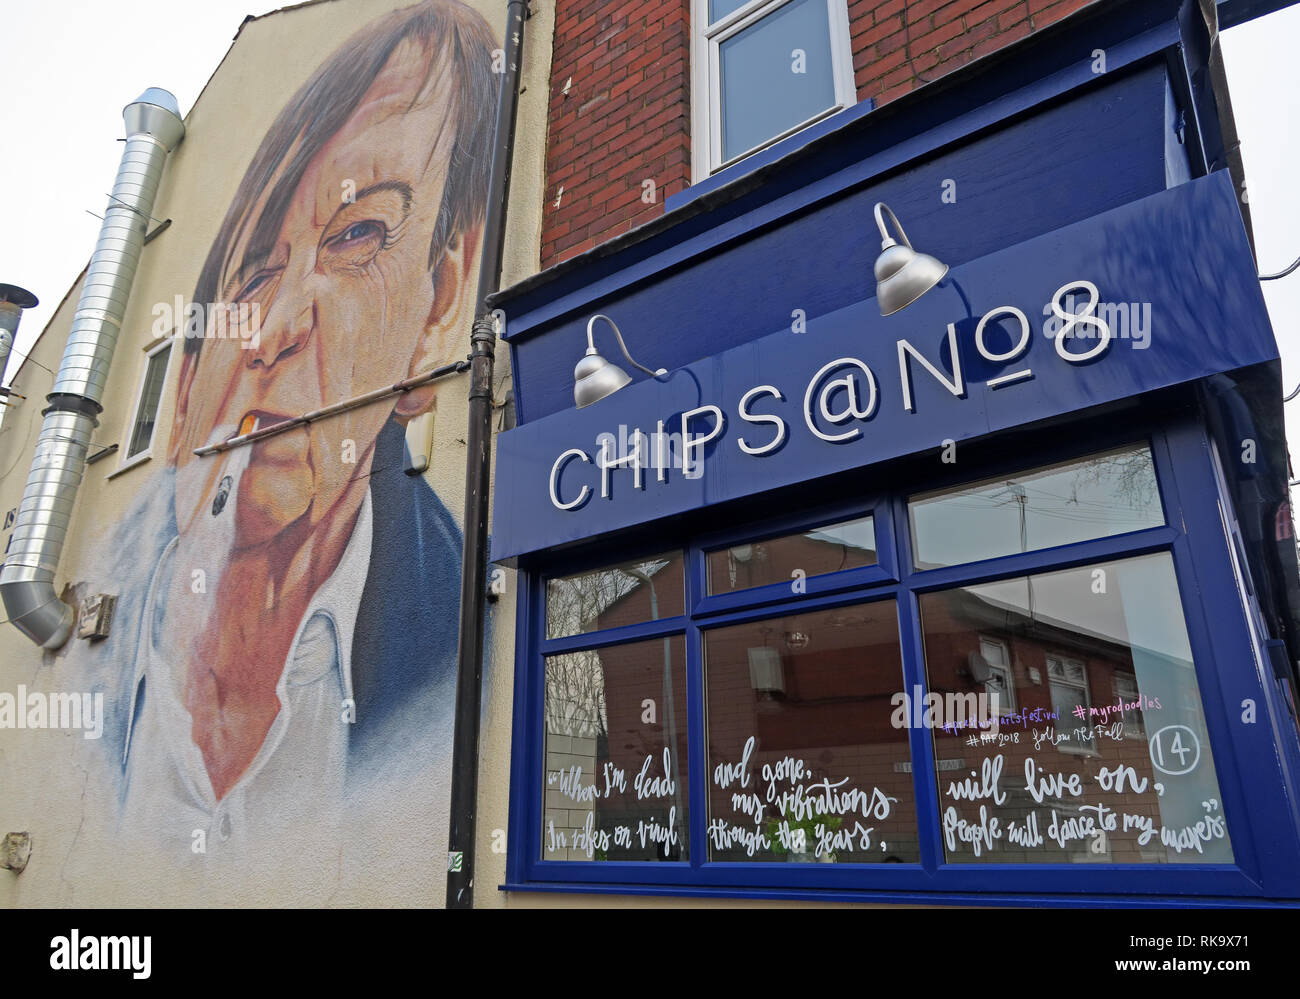 My vibrations will live on, In vibes on vinyl through the years, People will dance to my waves - Mark E Smith mural, Chips@No8, Psykick Dancehall Stock Photo